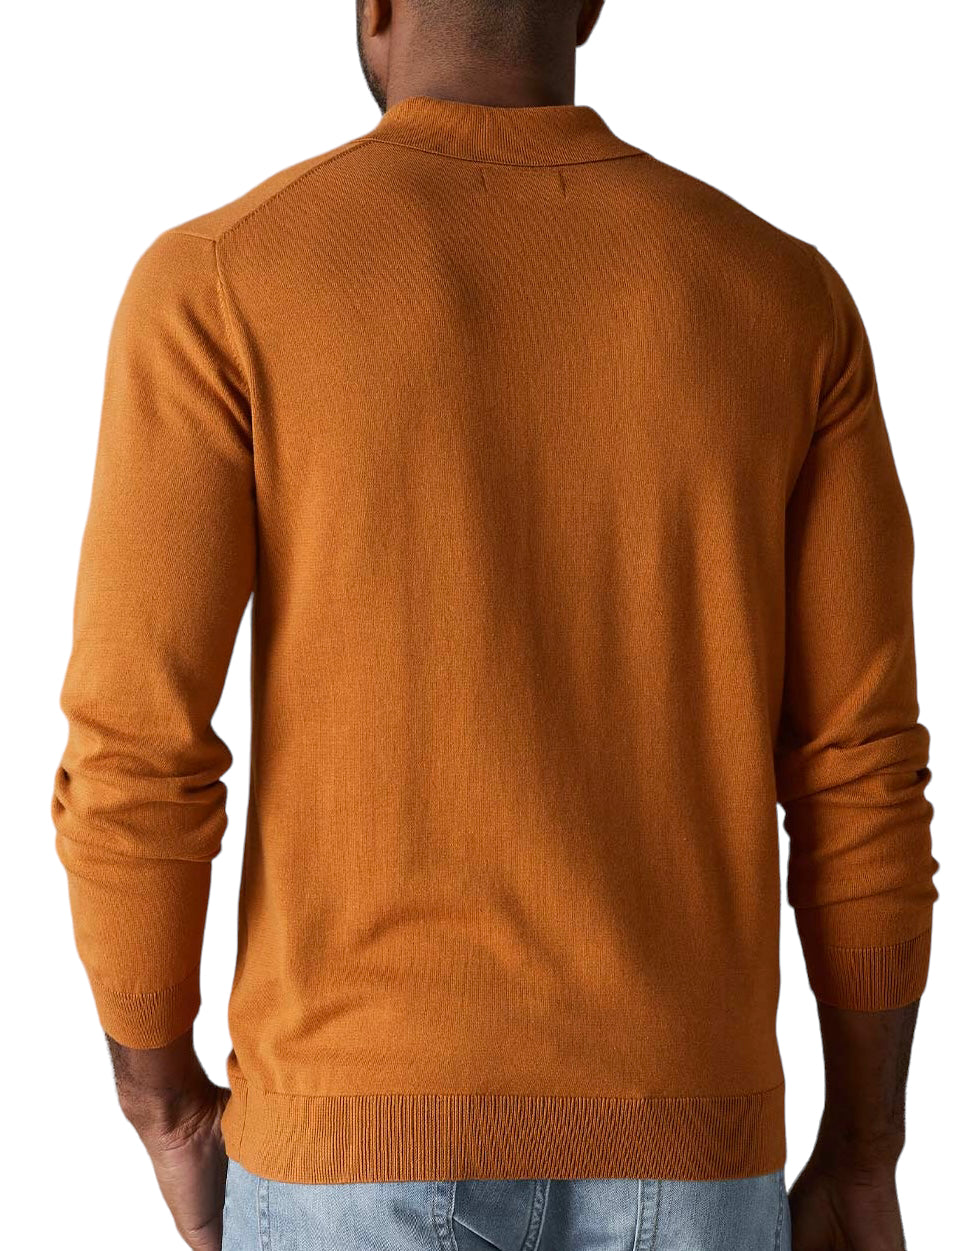 ROBLES KNIT LONG SLEEVES POLO